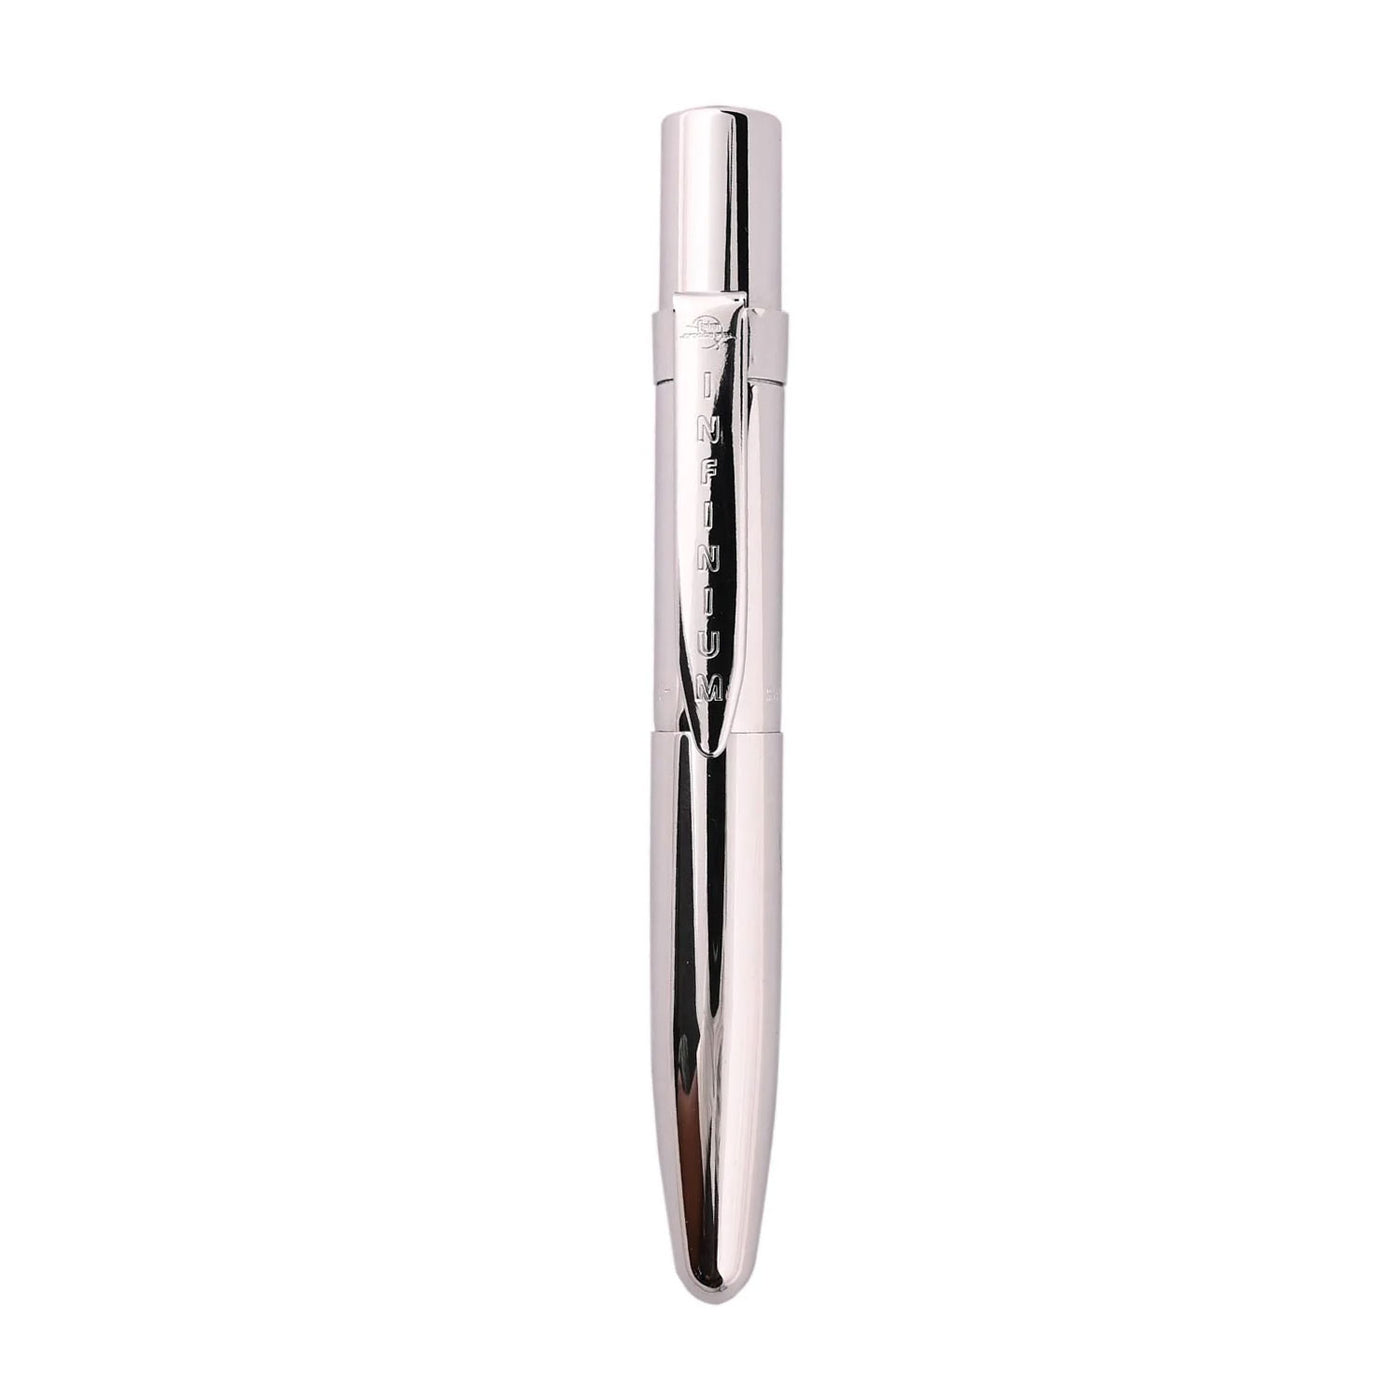 Fisher Space Infinium Ball Pen with Blue Ink - Chrome 5